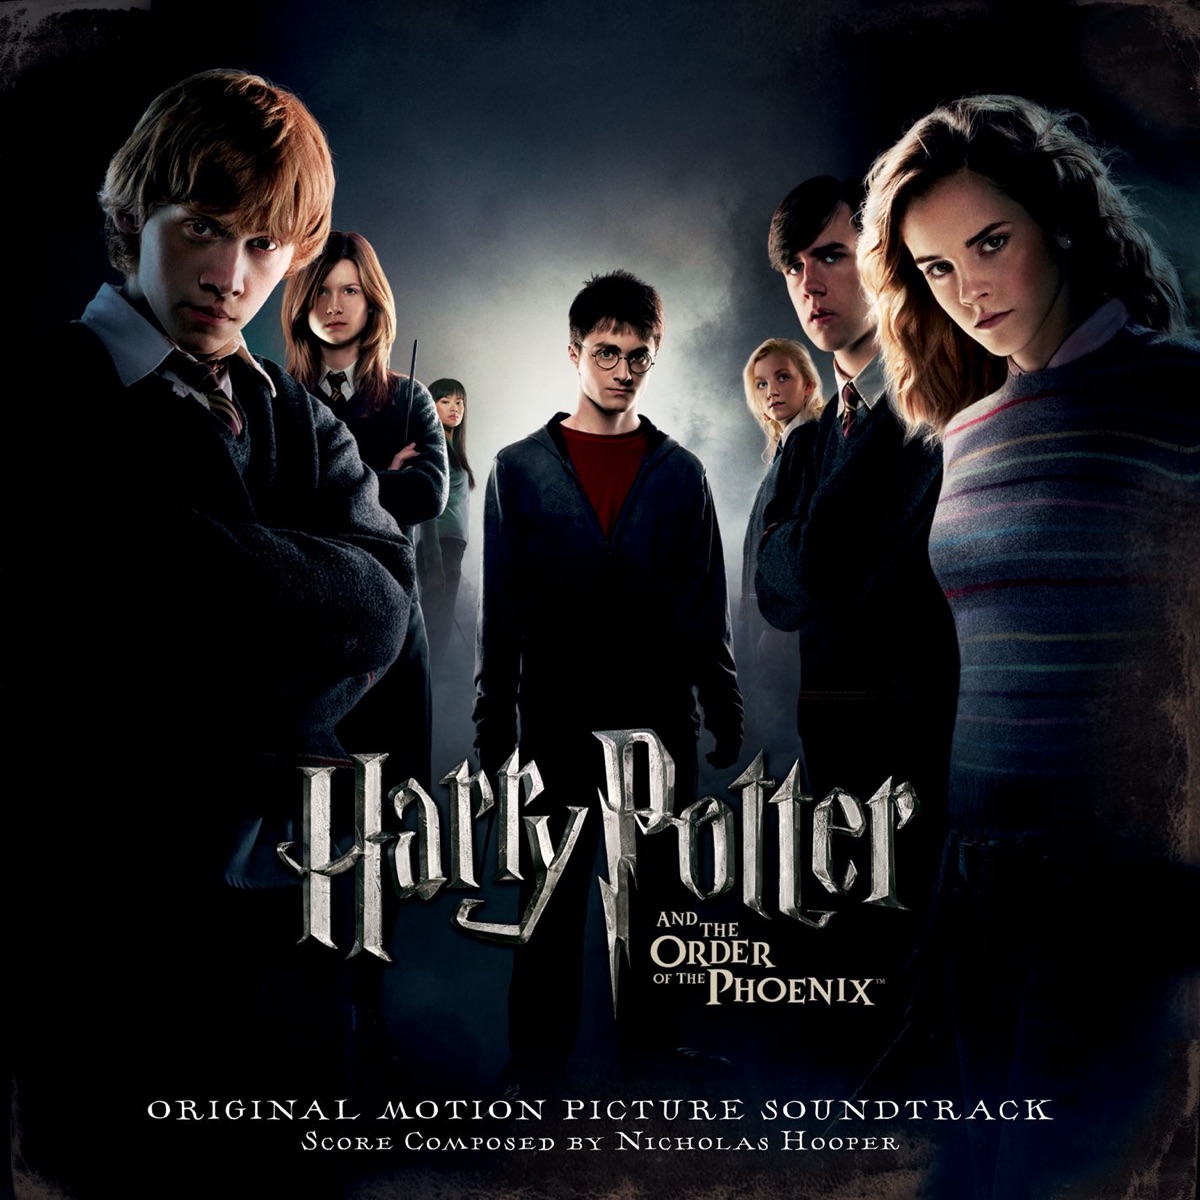 Harry Potter and the Half-Blood Prince (Original Motion Picture Soundtrack)  by Nicholas Hooper on Apple Music